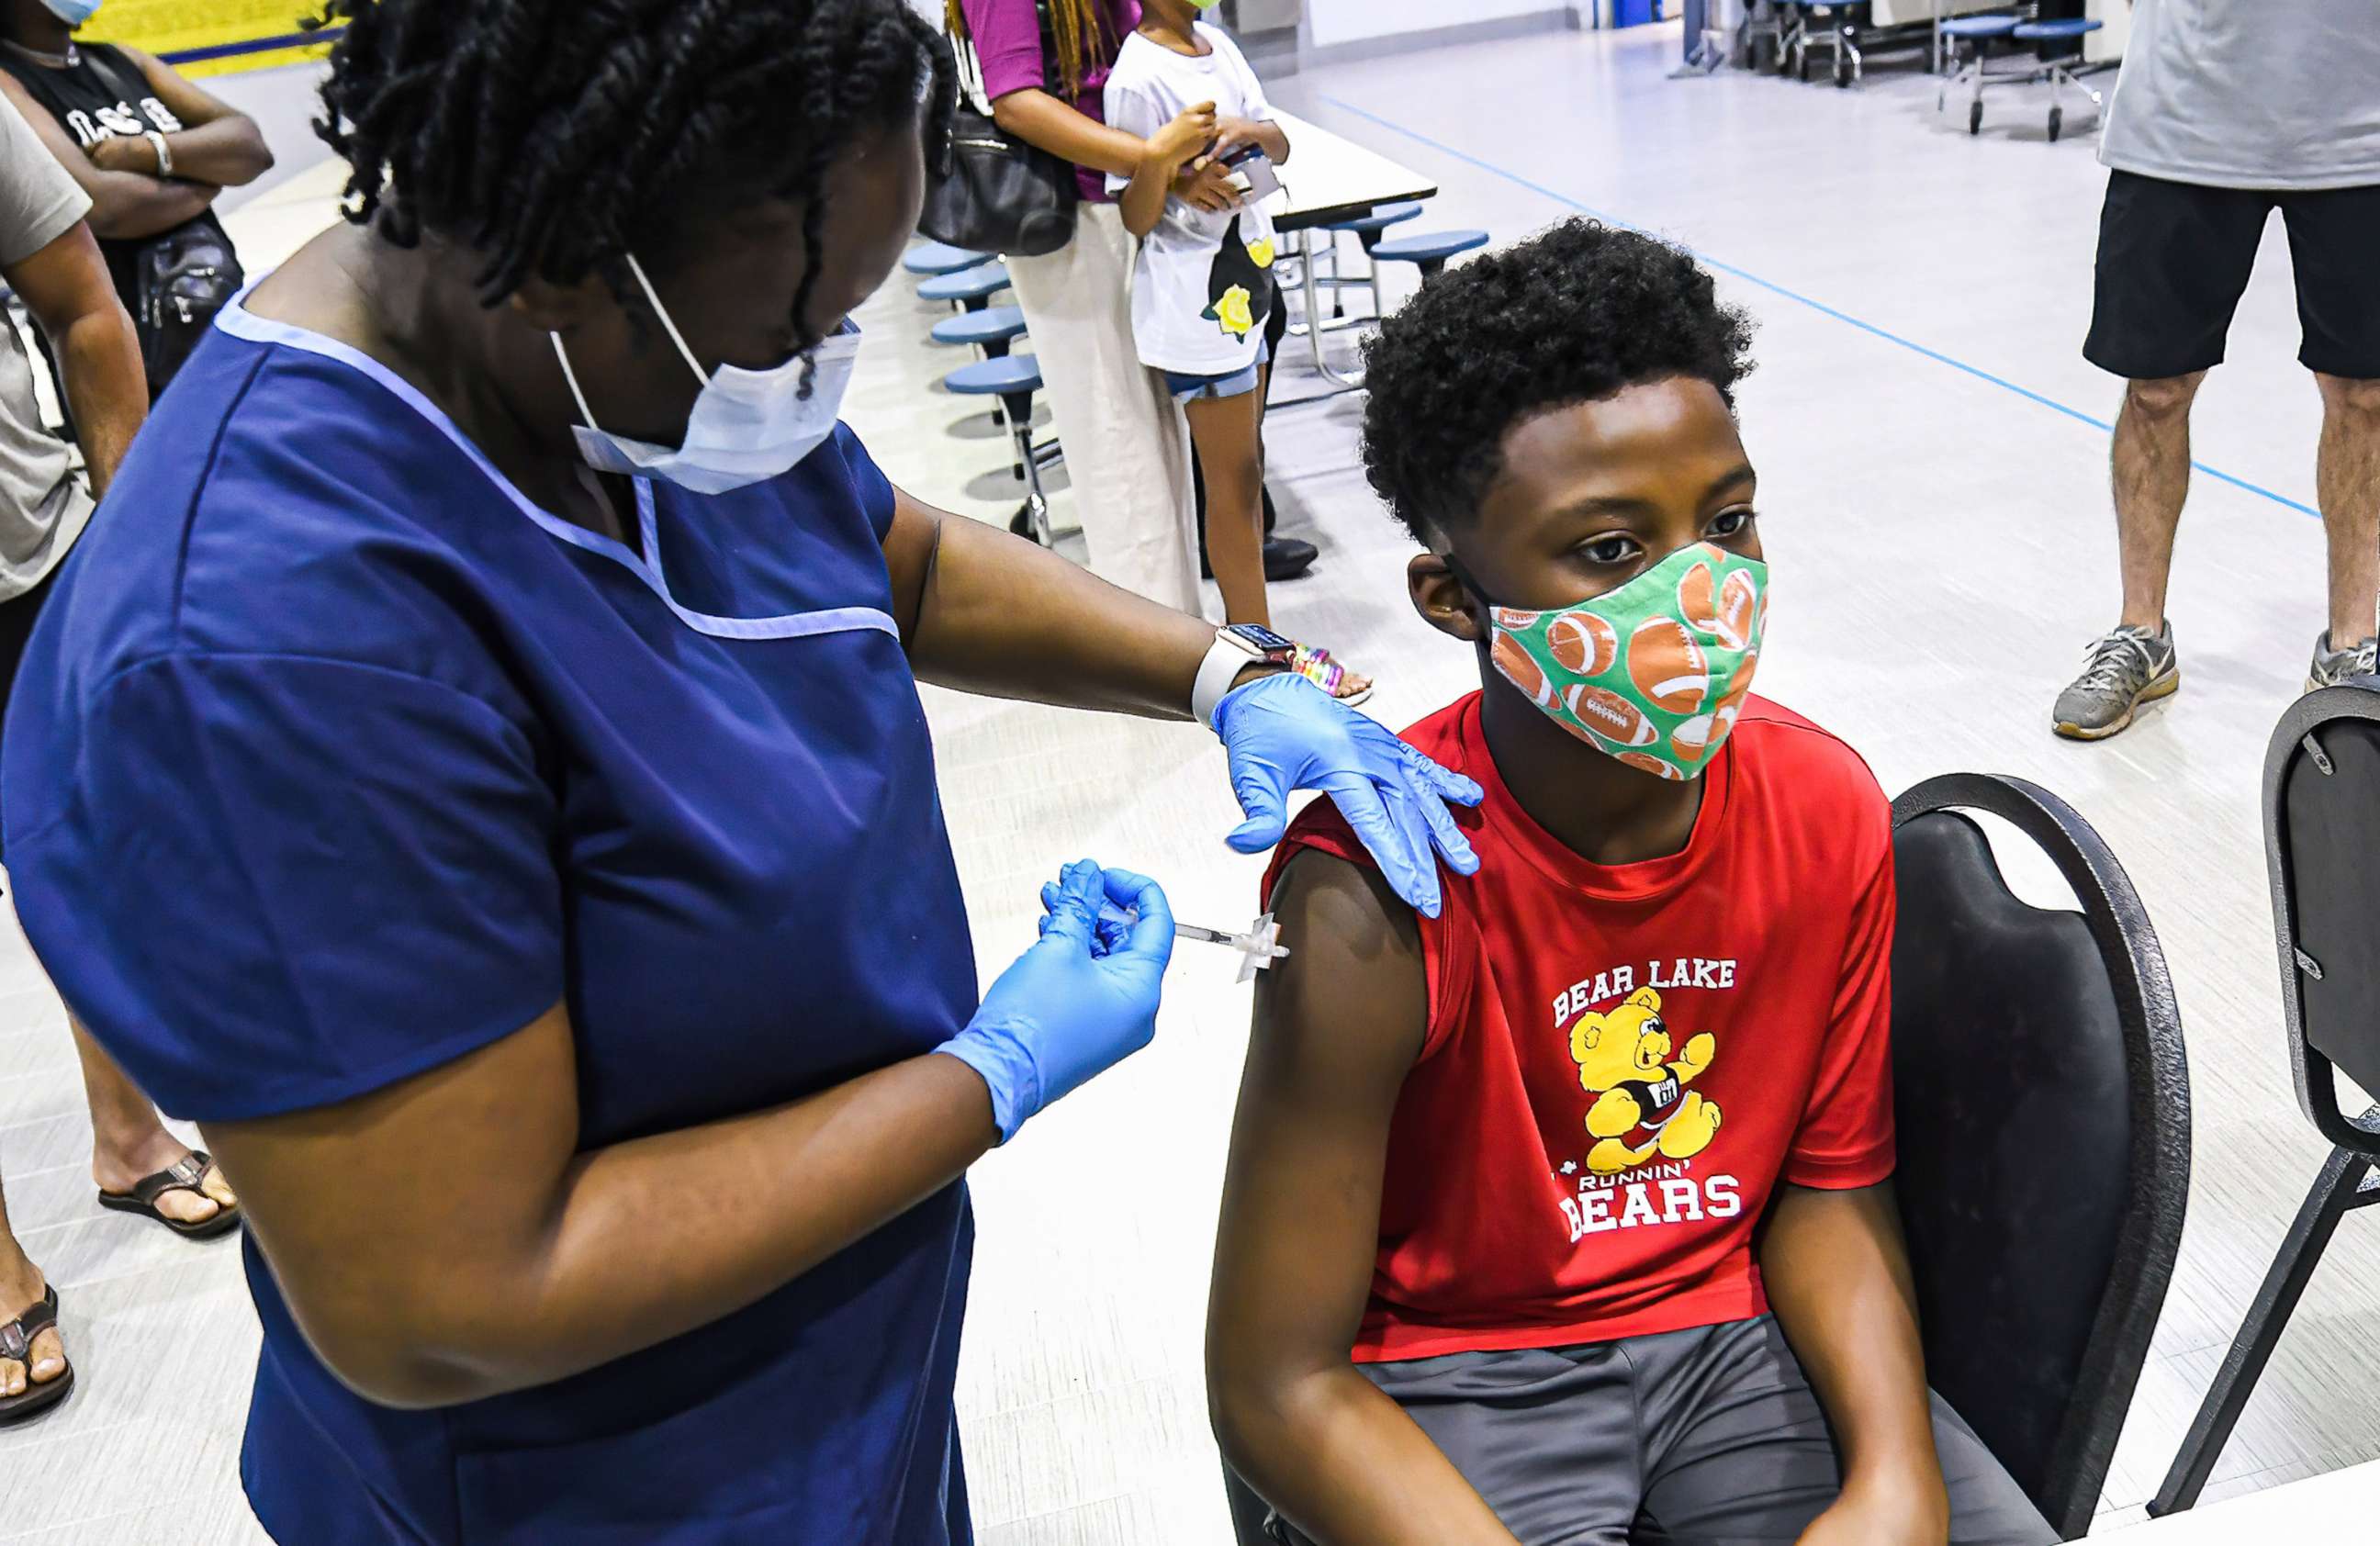 PHOTO: A nurse gives a boy a dose of the Pfizer vaccine at a vaccine clinic in Longwood, Fla., on Sept. 8, 2021, the day before classes begin for the 2021-22 school year.